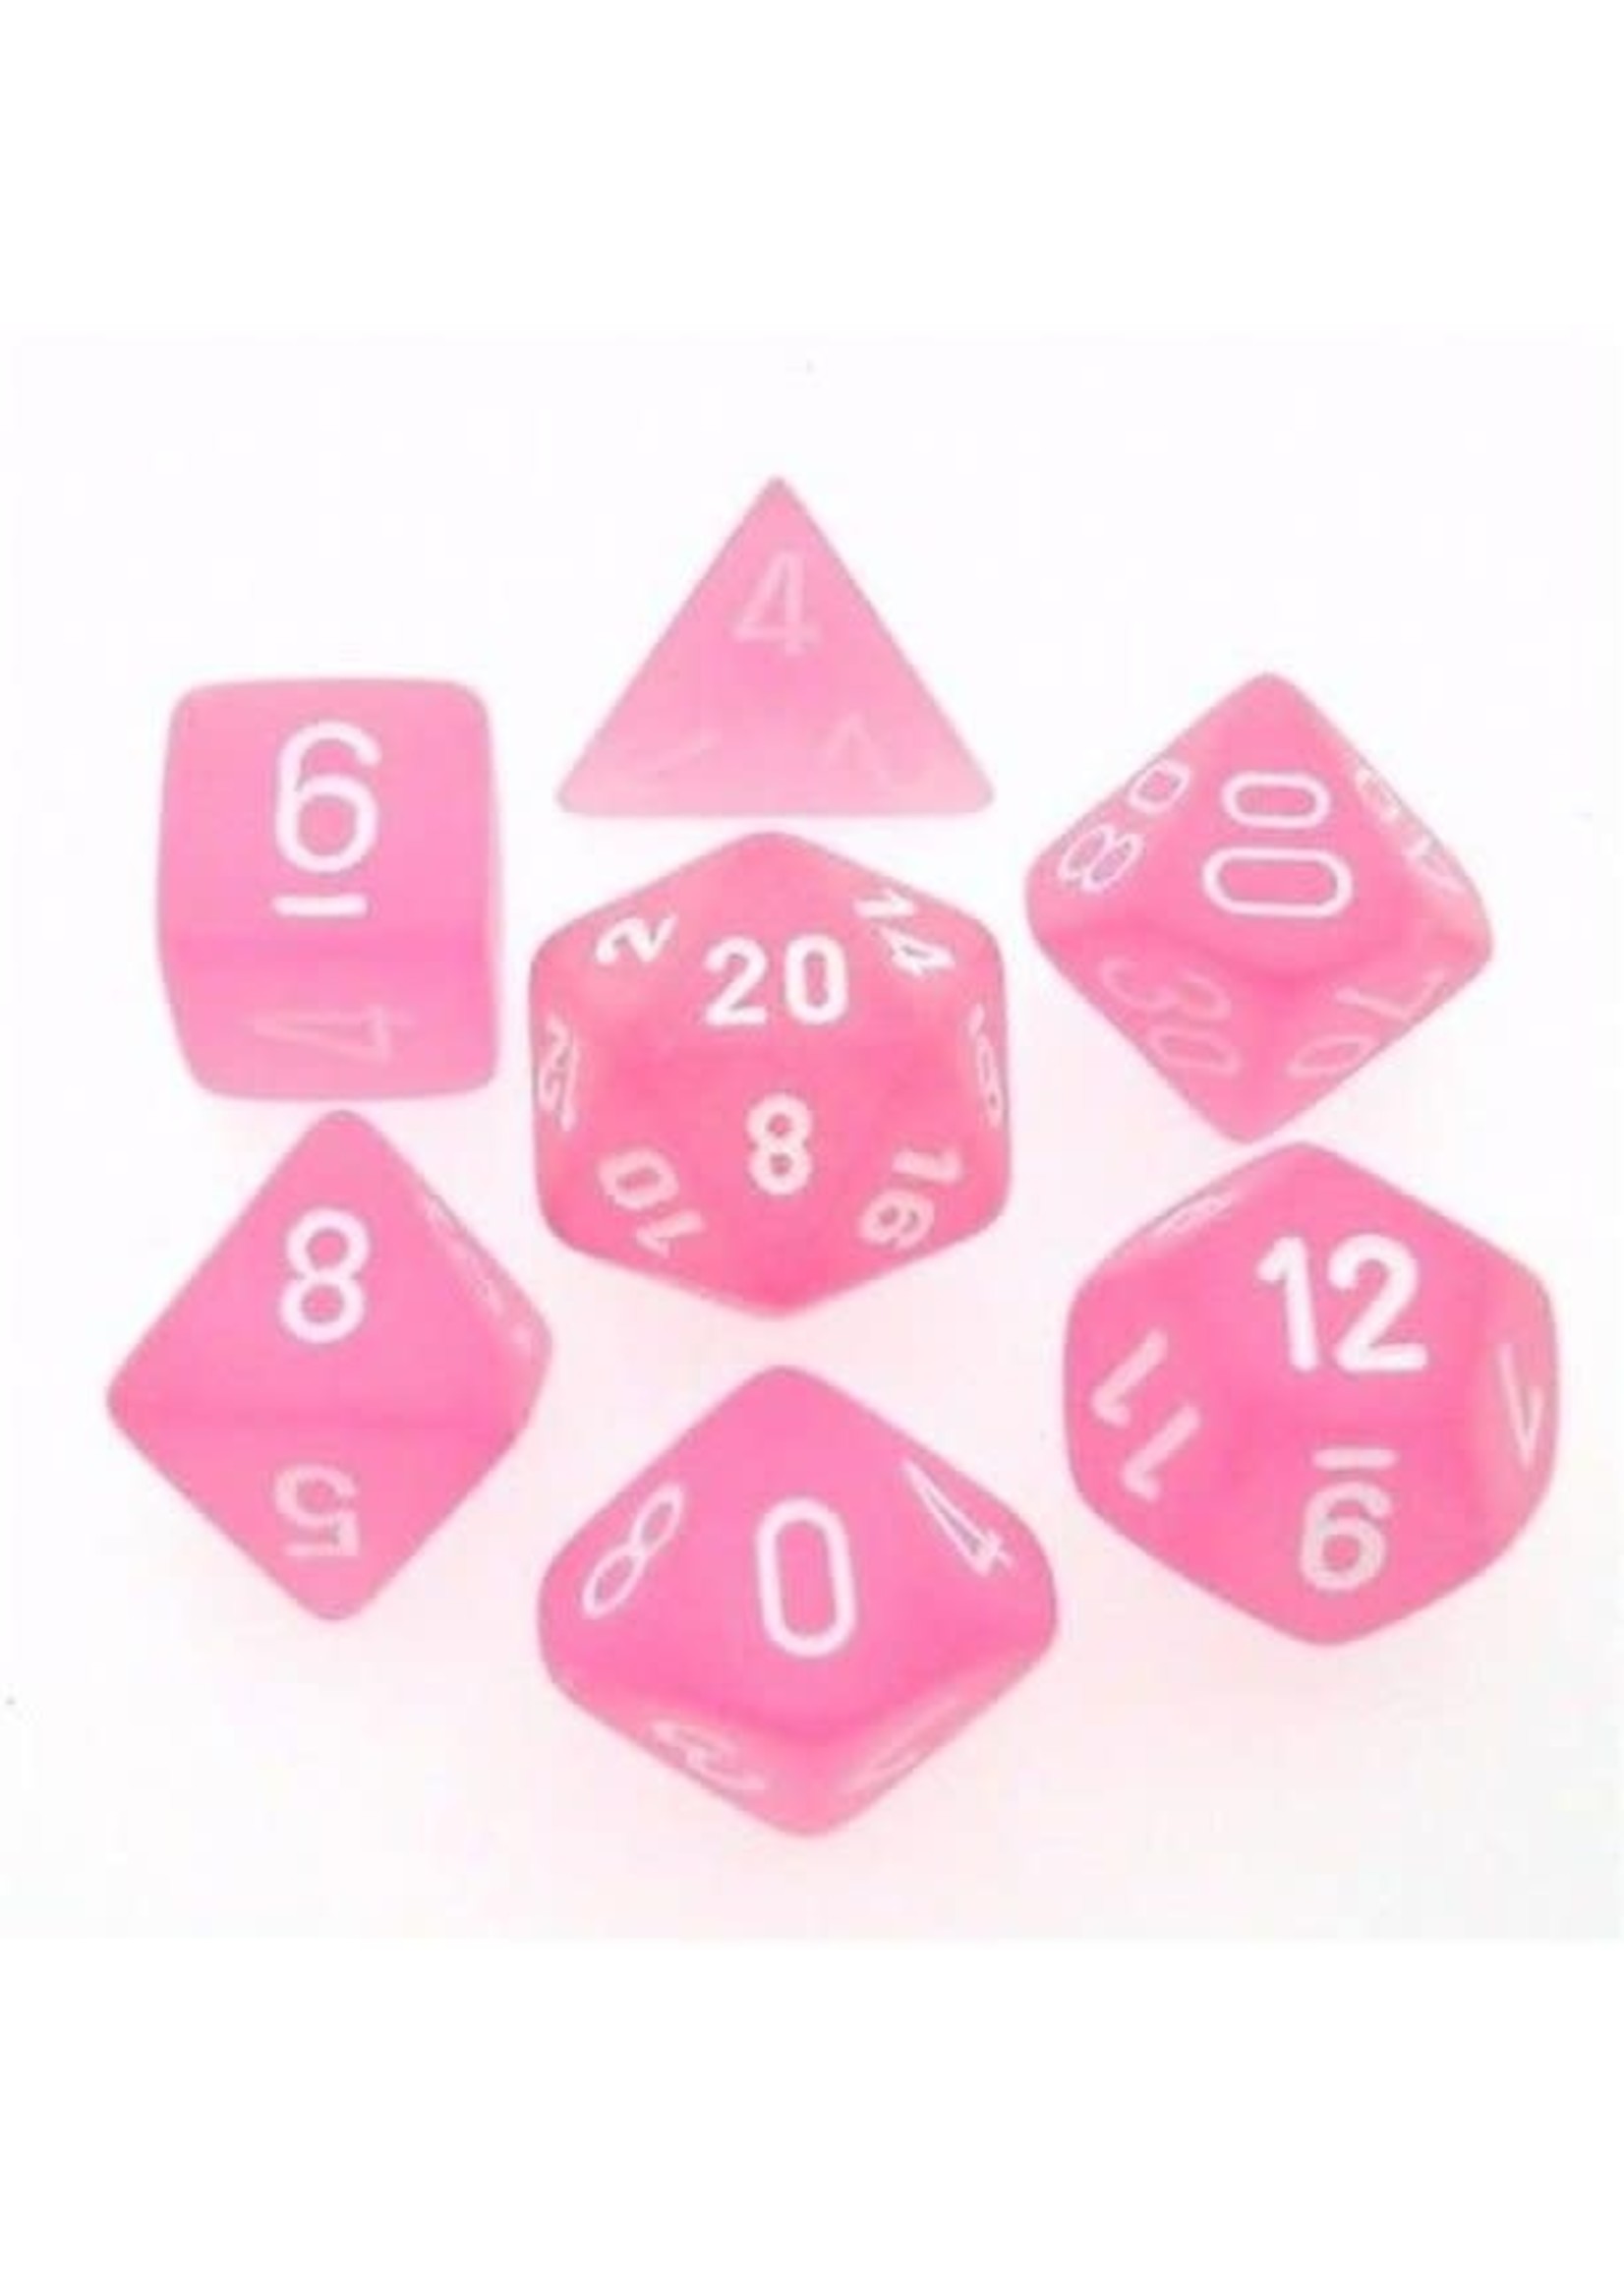 Chessex Frosted Poly 7 set: Pink w/ White